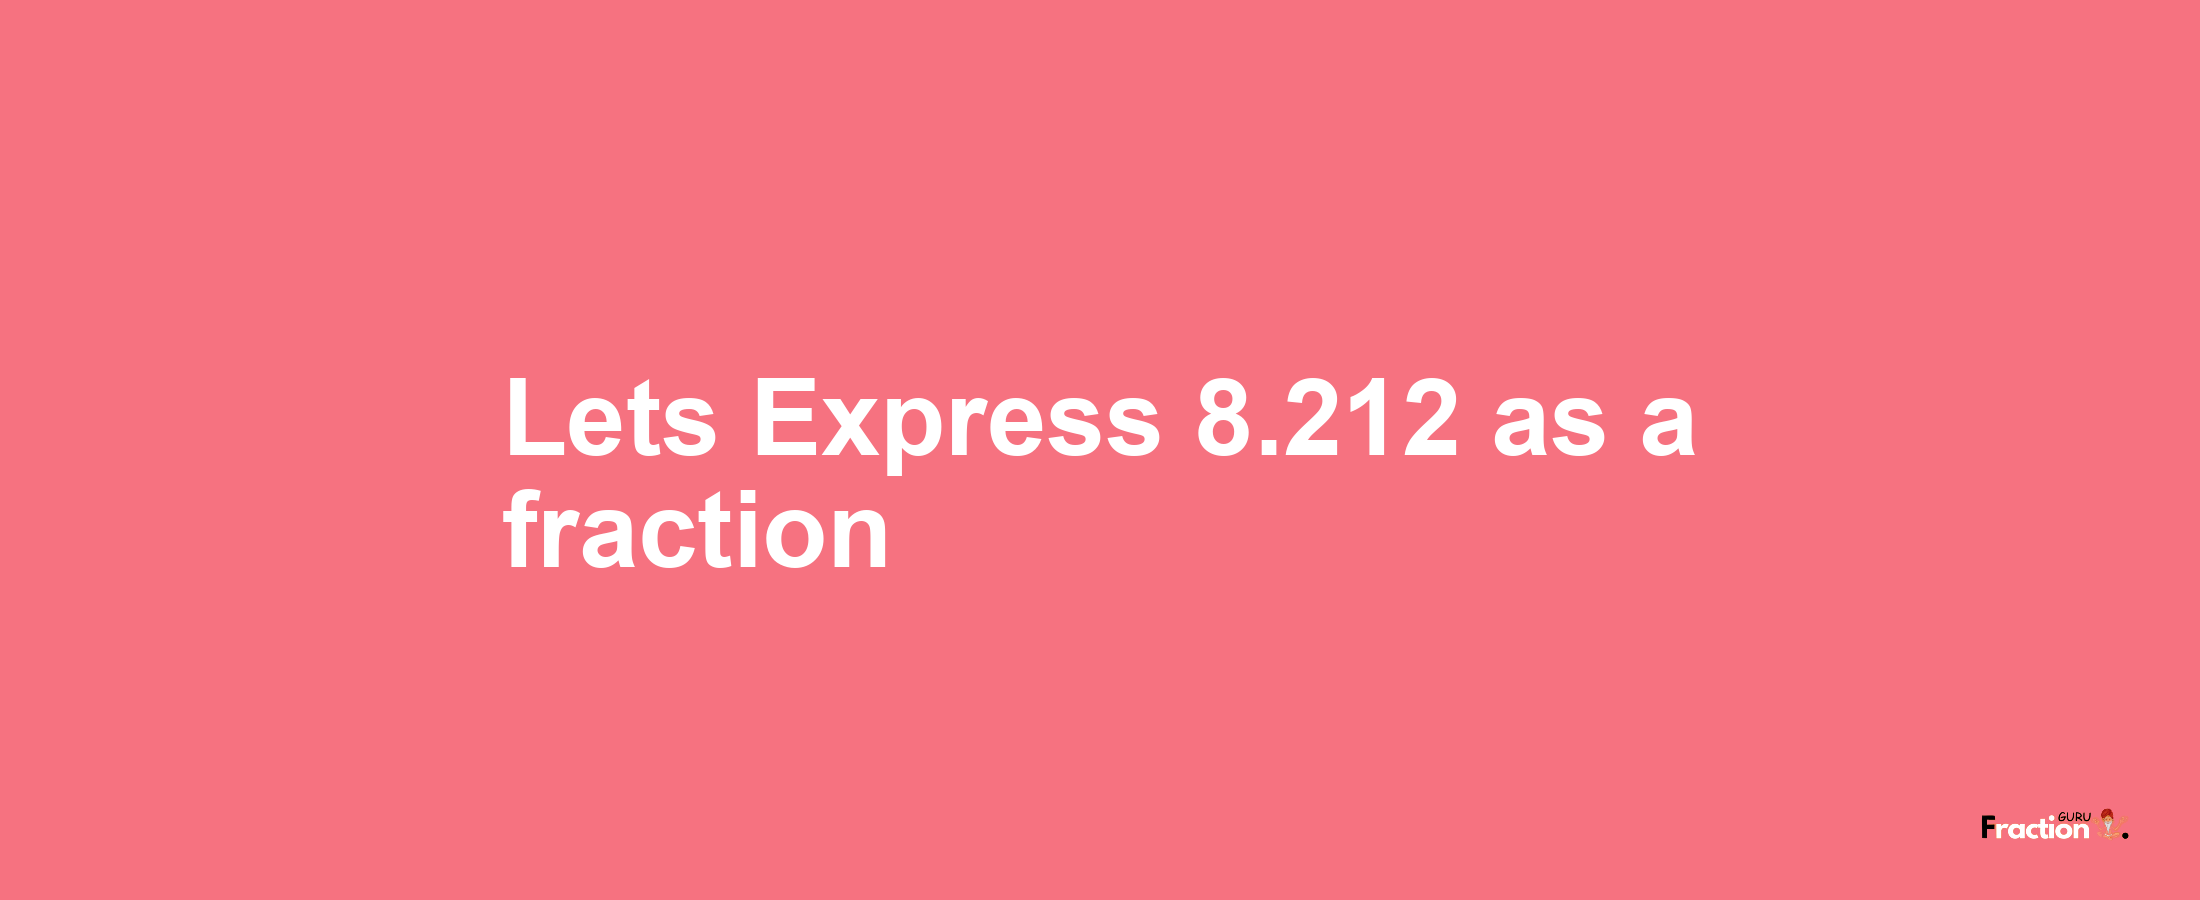 Lets Express 8.212 as afraction